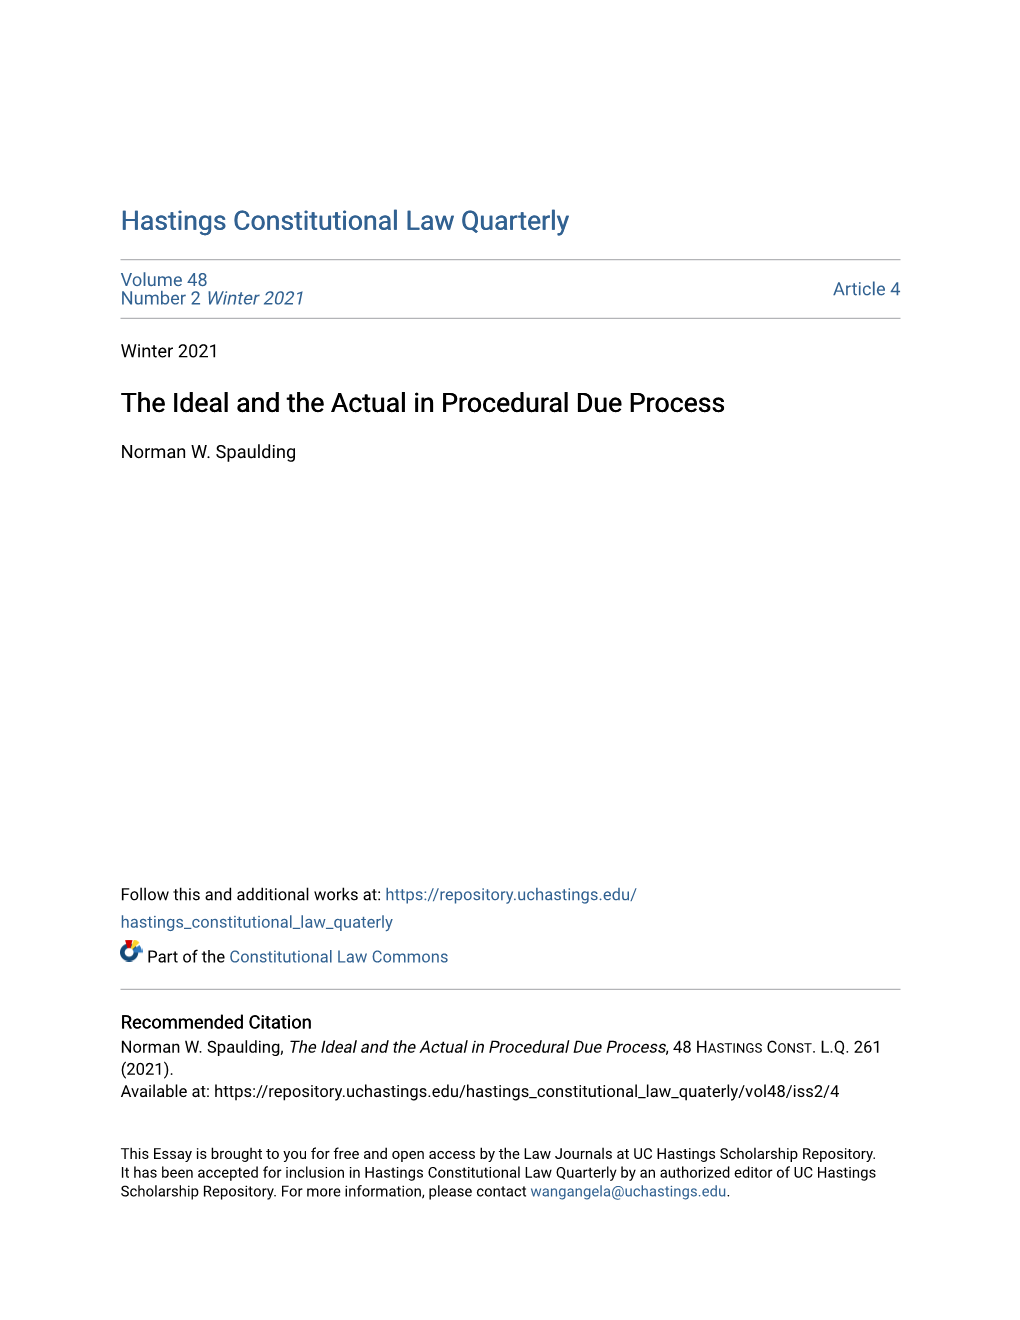 The Ideal and the Actual in Procedural Due Process